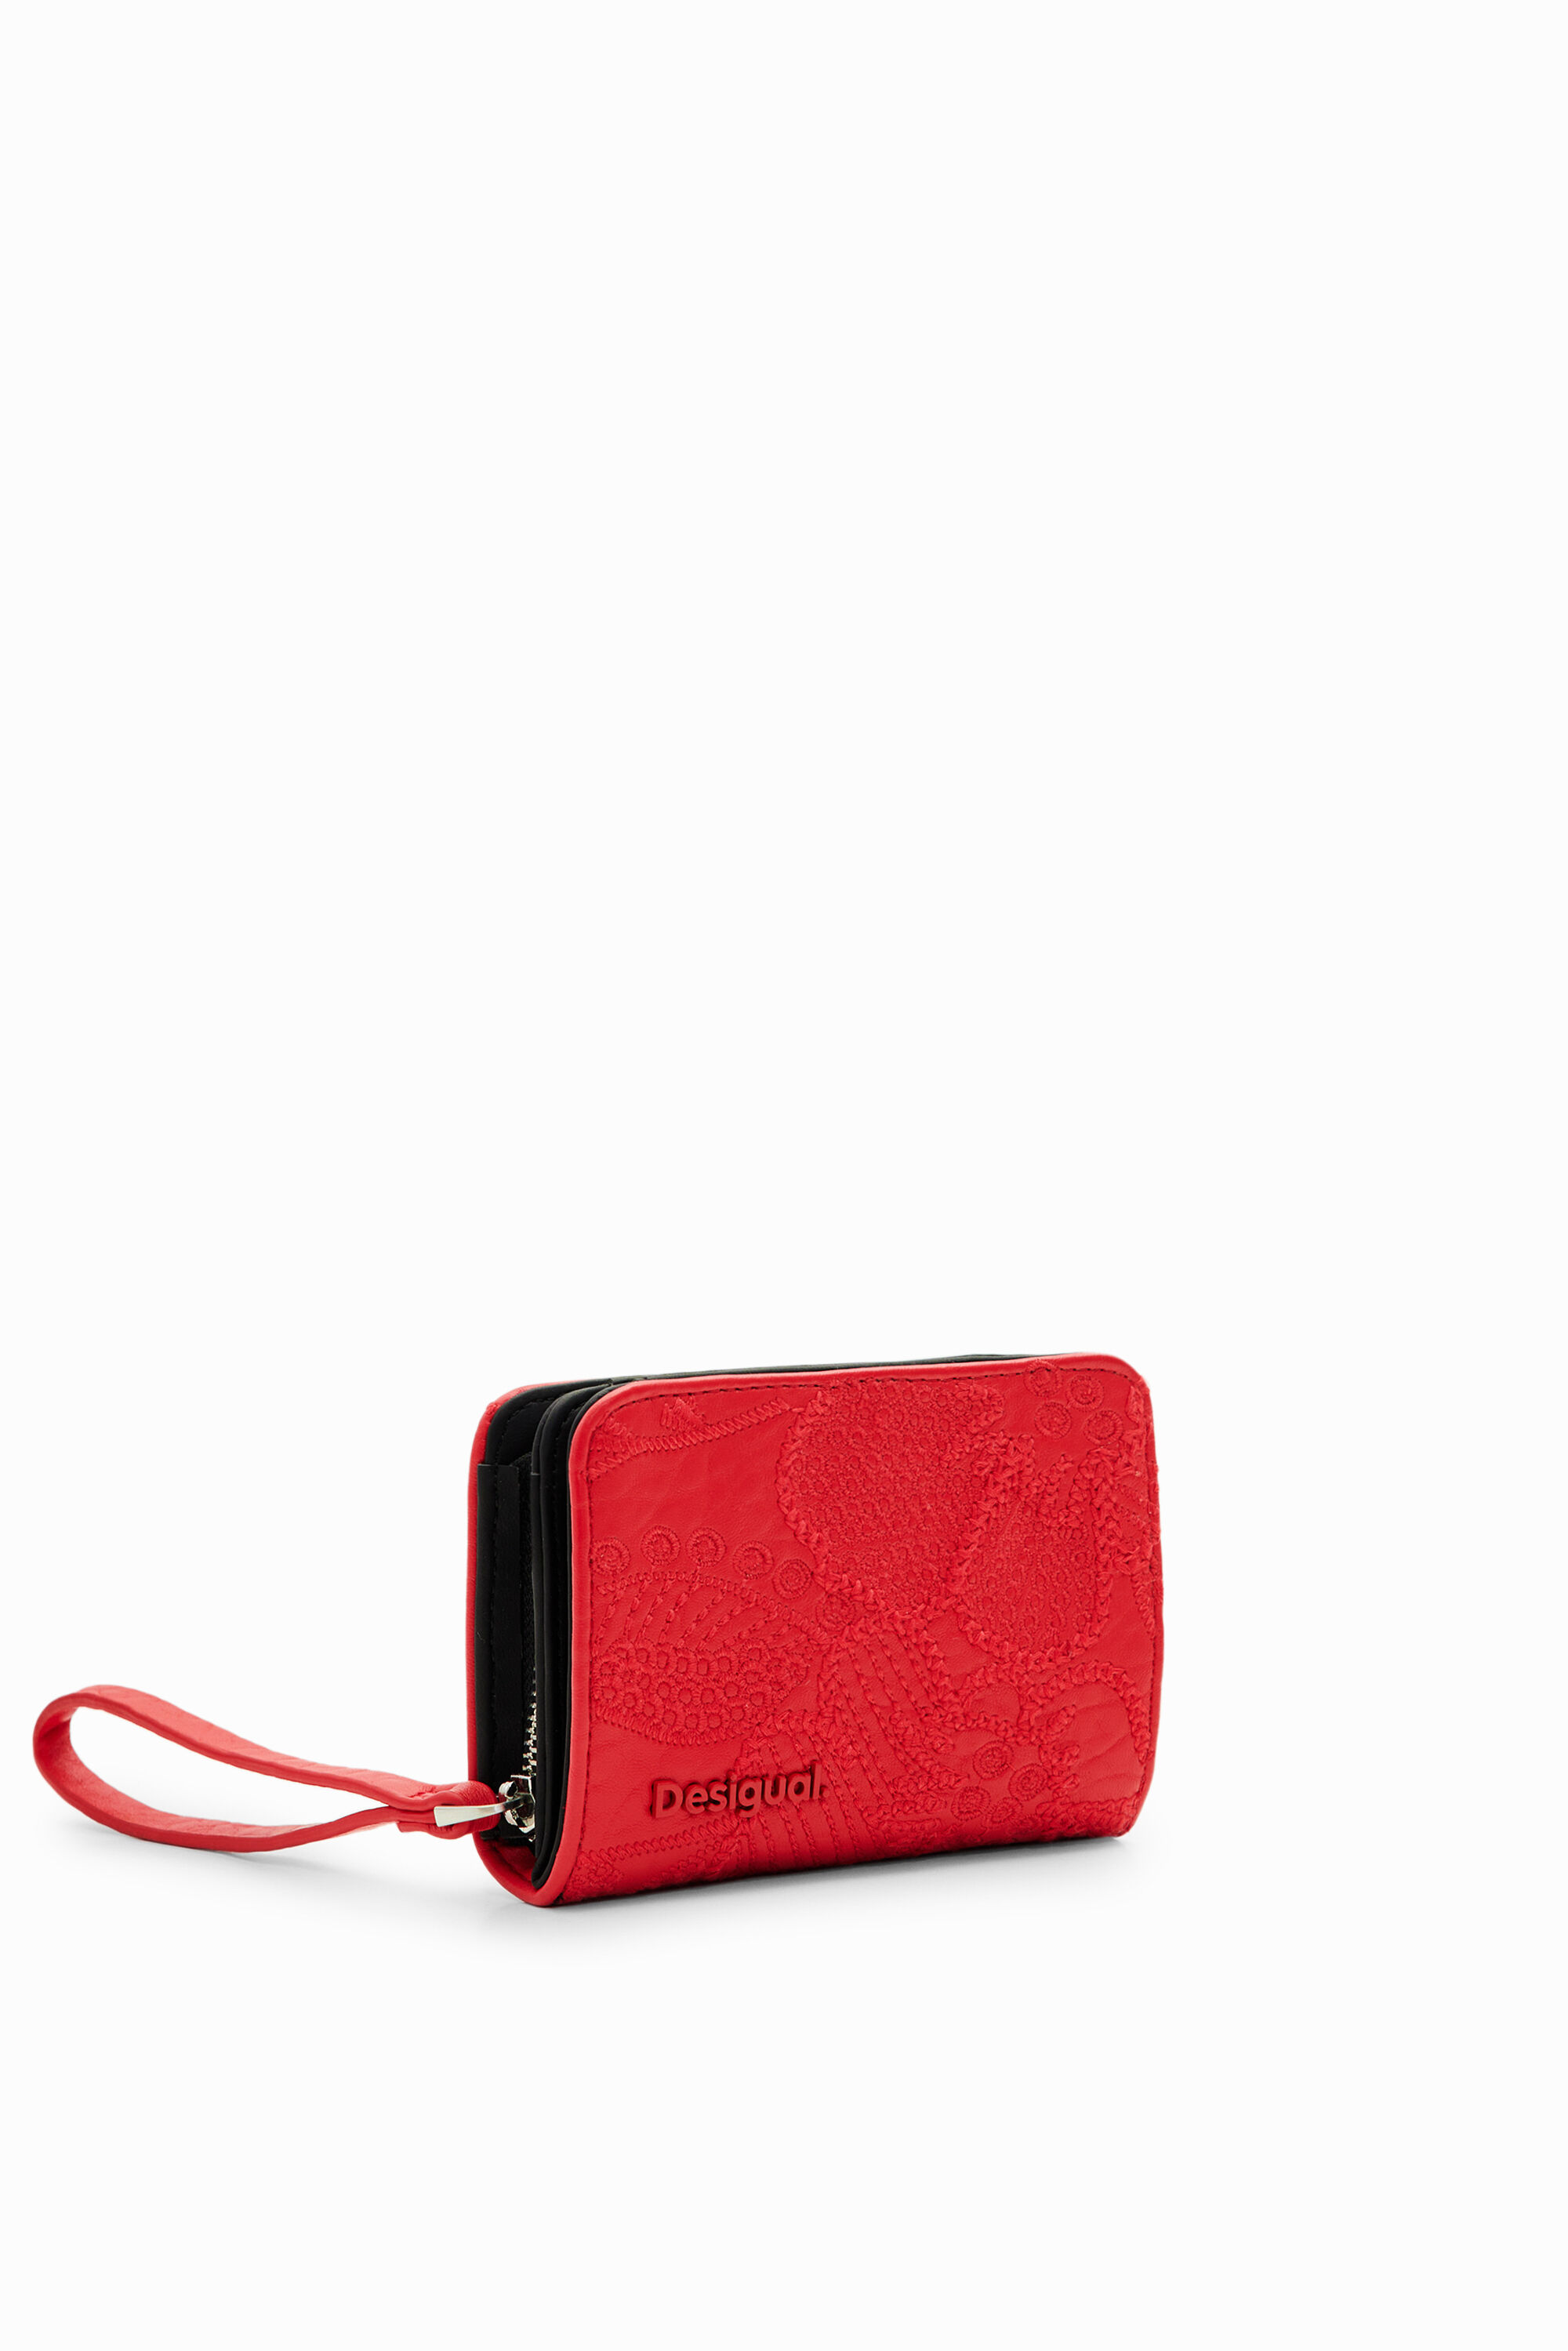 Desigual S Embroidered Floral Wallet In Red